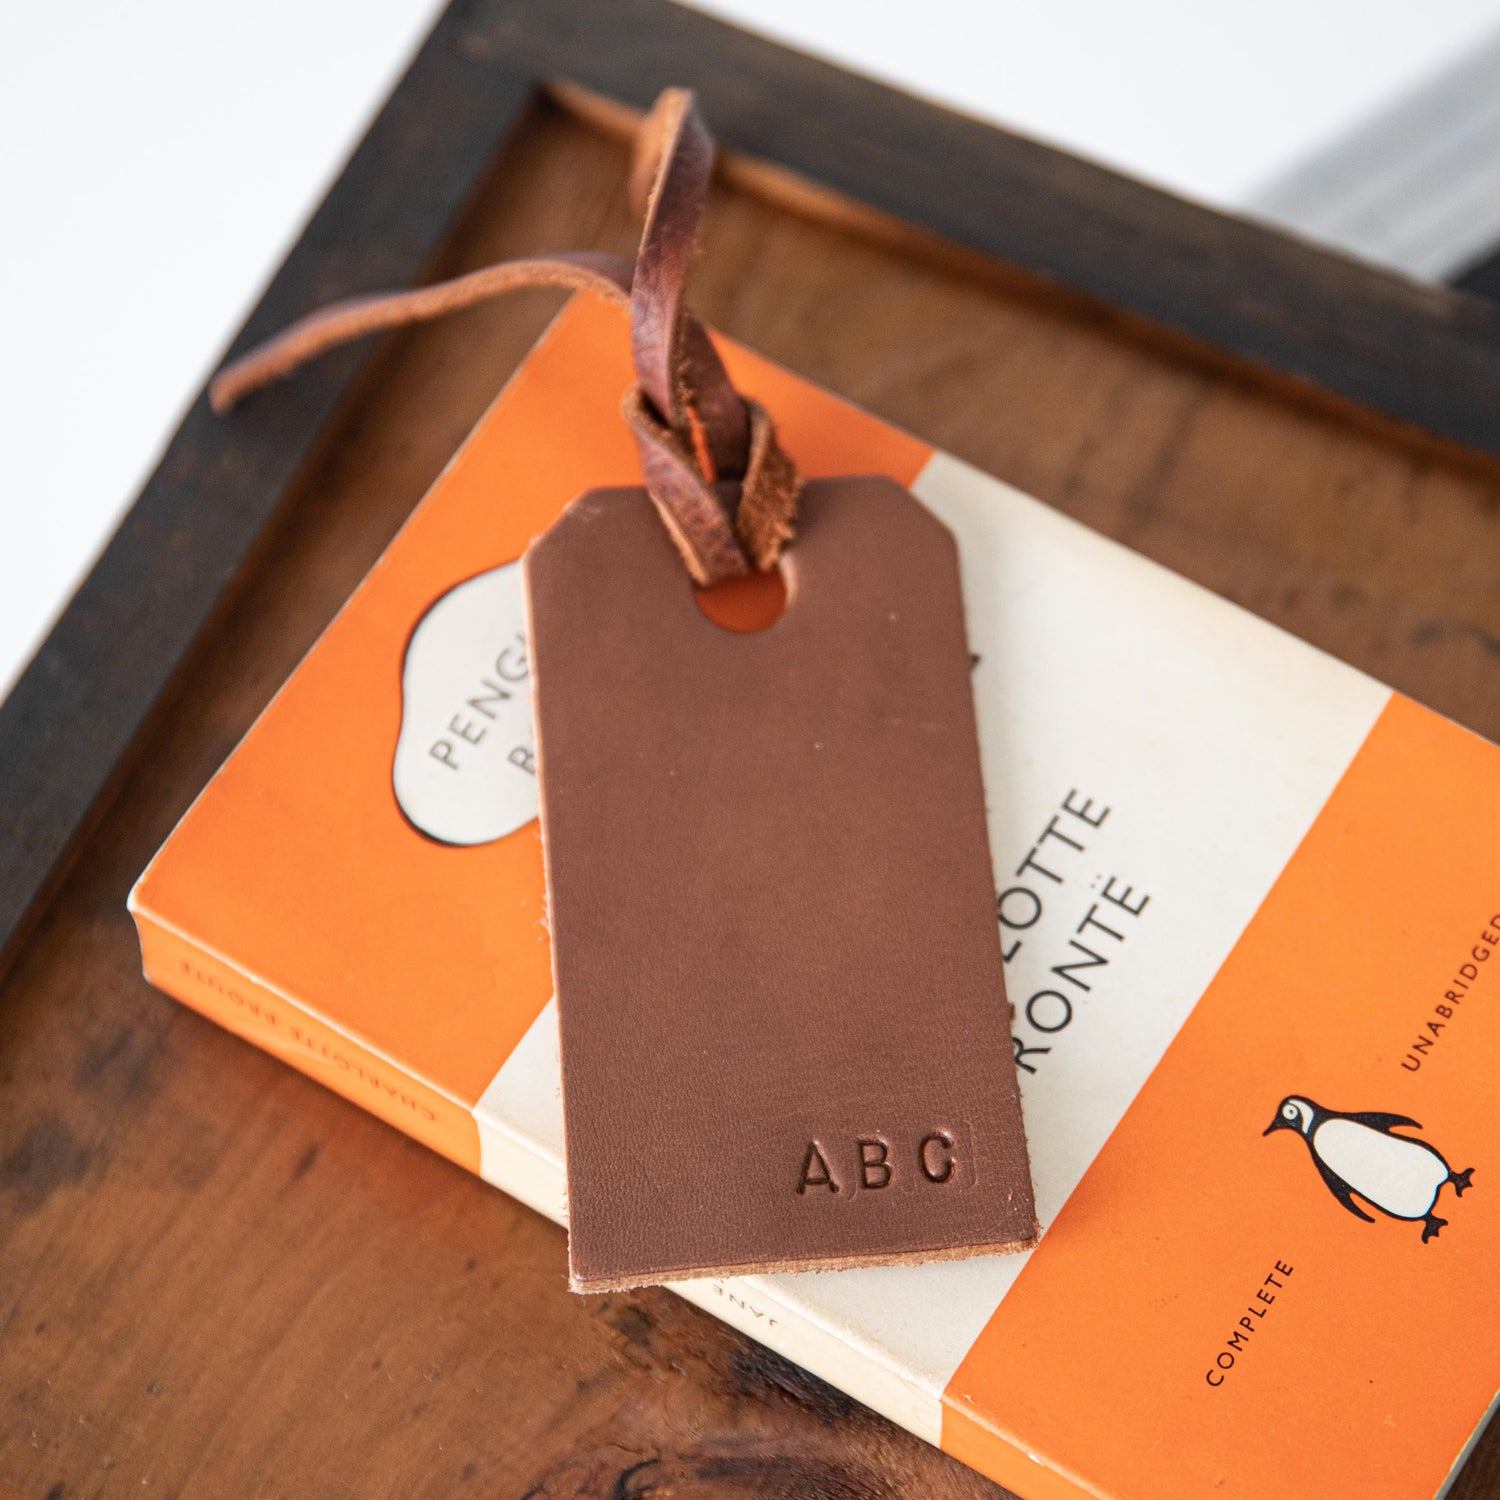 Personalized Luggage Tag - Leather - Brown - Engraved